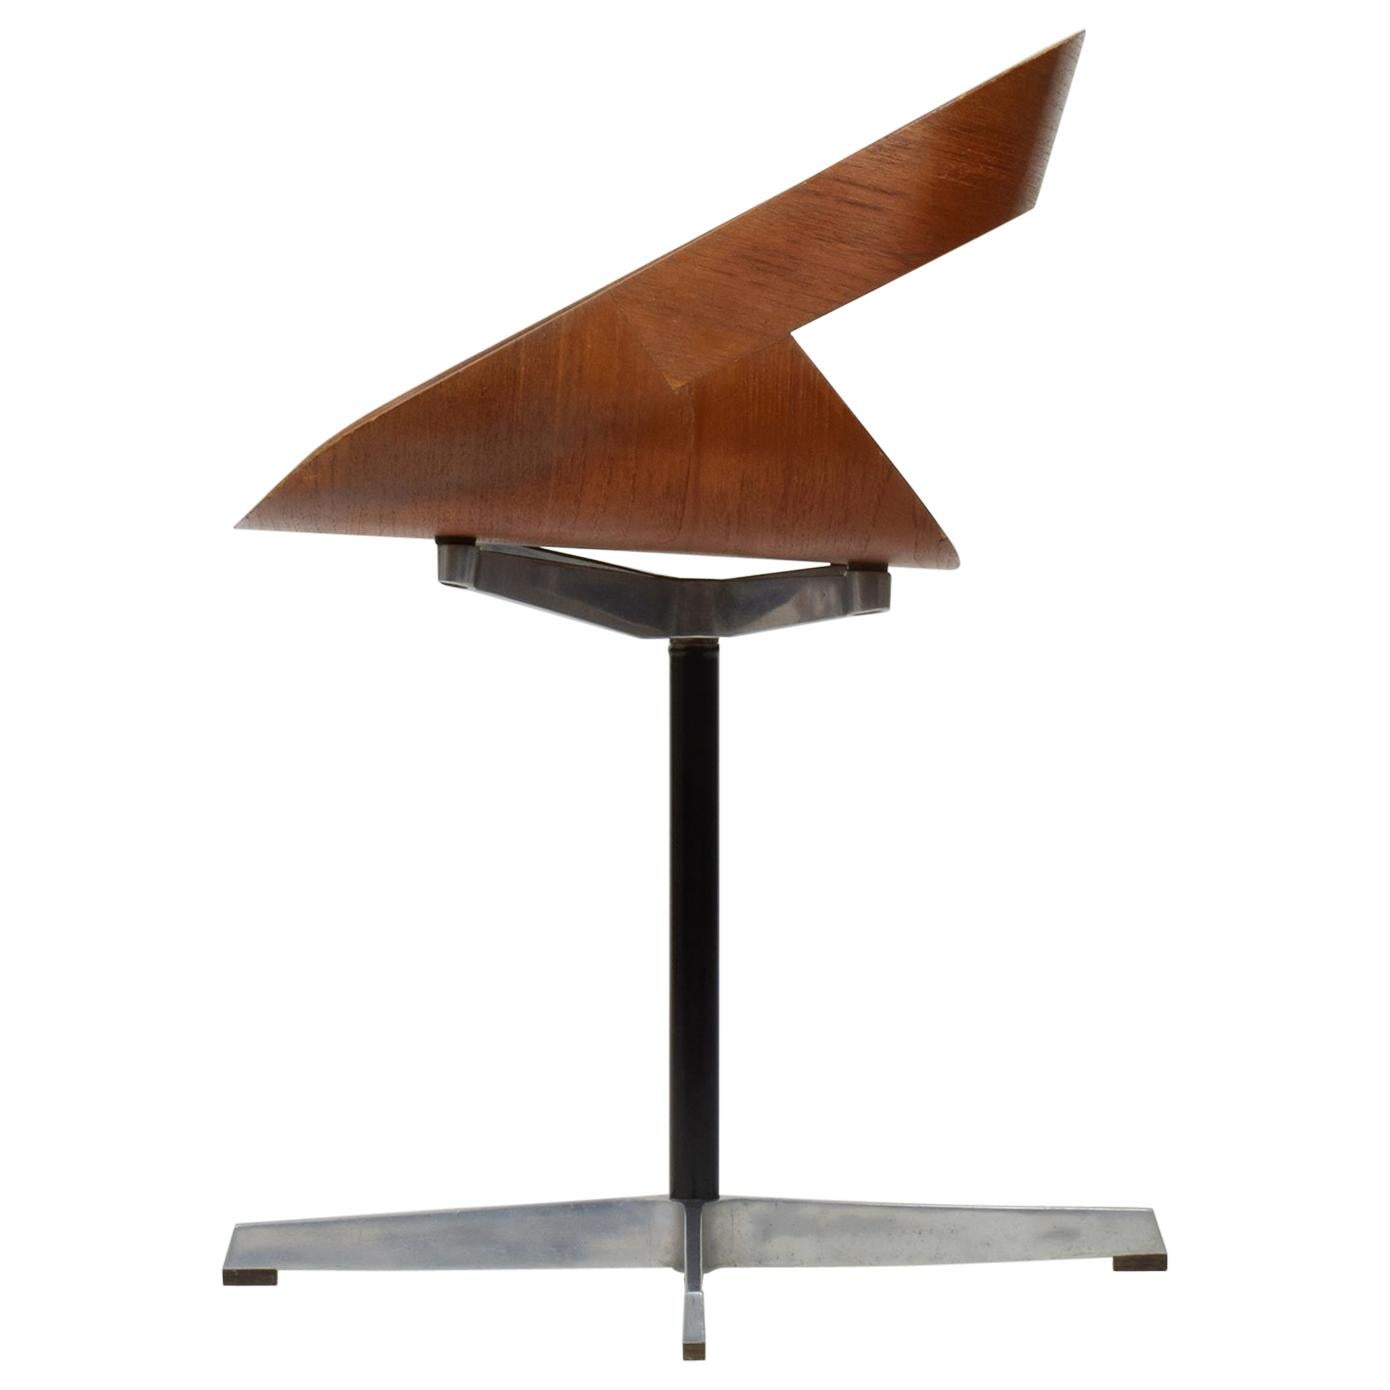 Geoffrey Harcourt, Chair 130, 'RCA' Chair, Designed 1960, Produced by Artifort